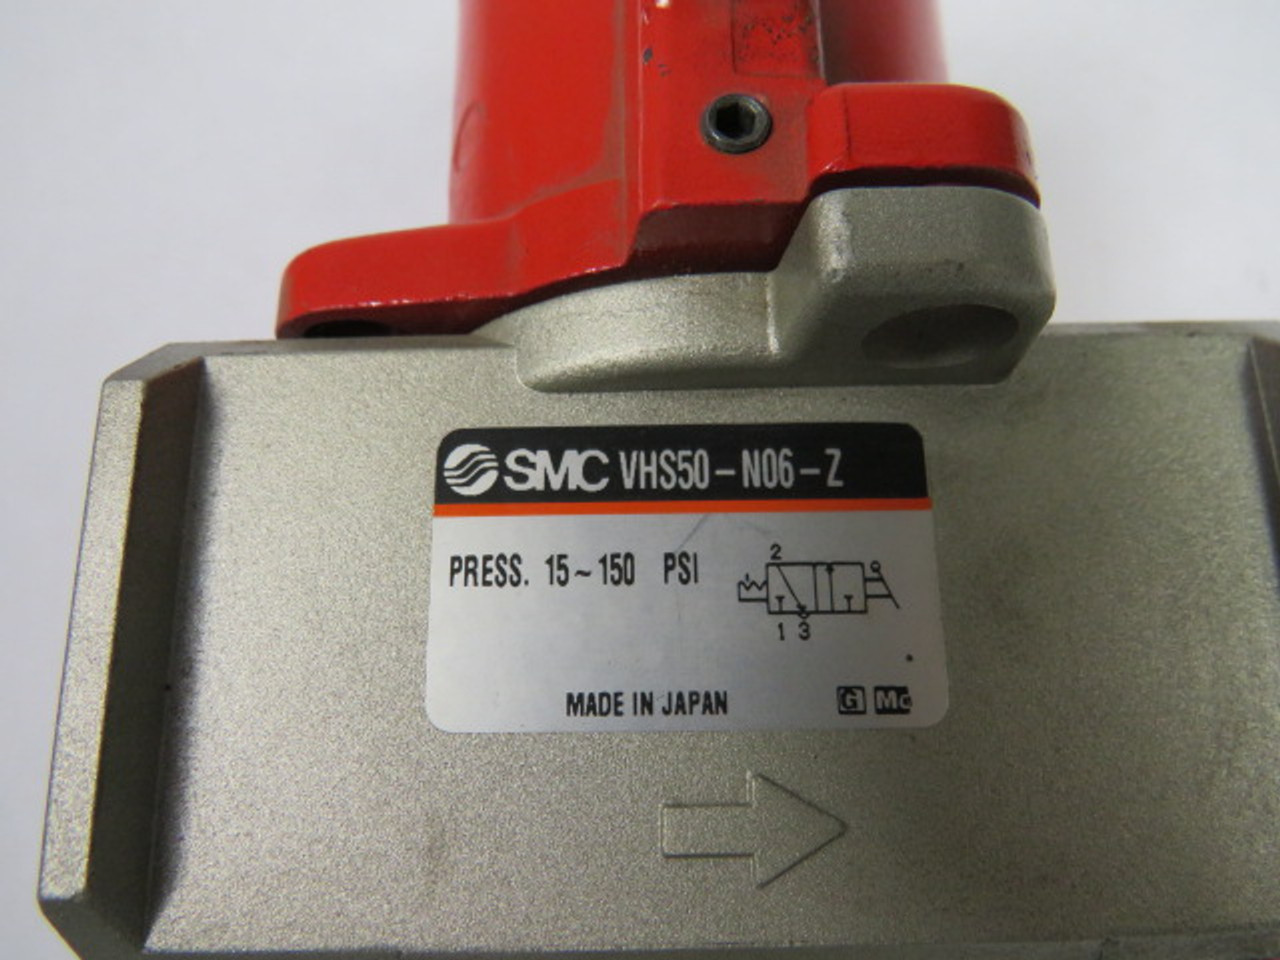 SMC VHS50-N06-Z Valve w/ Lock Out 3 way 15-150psi USED